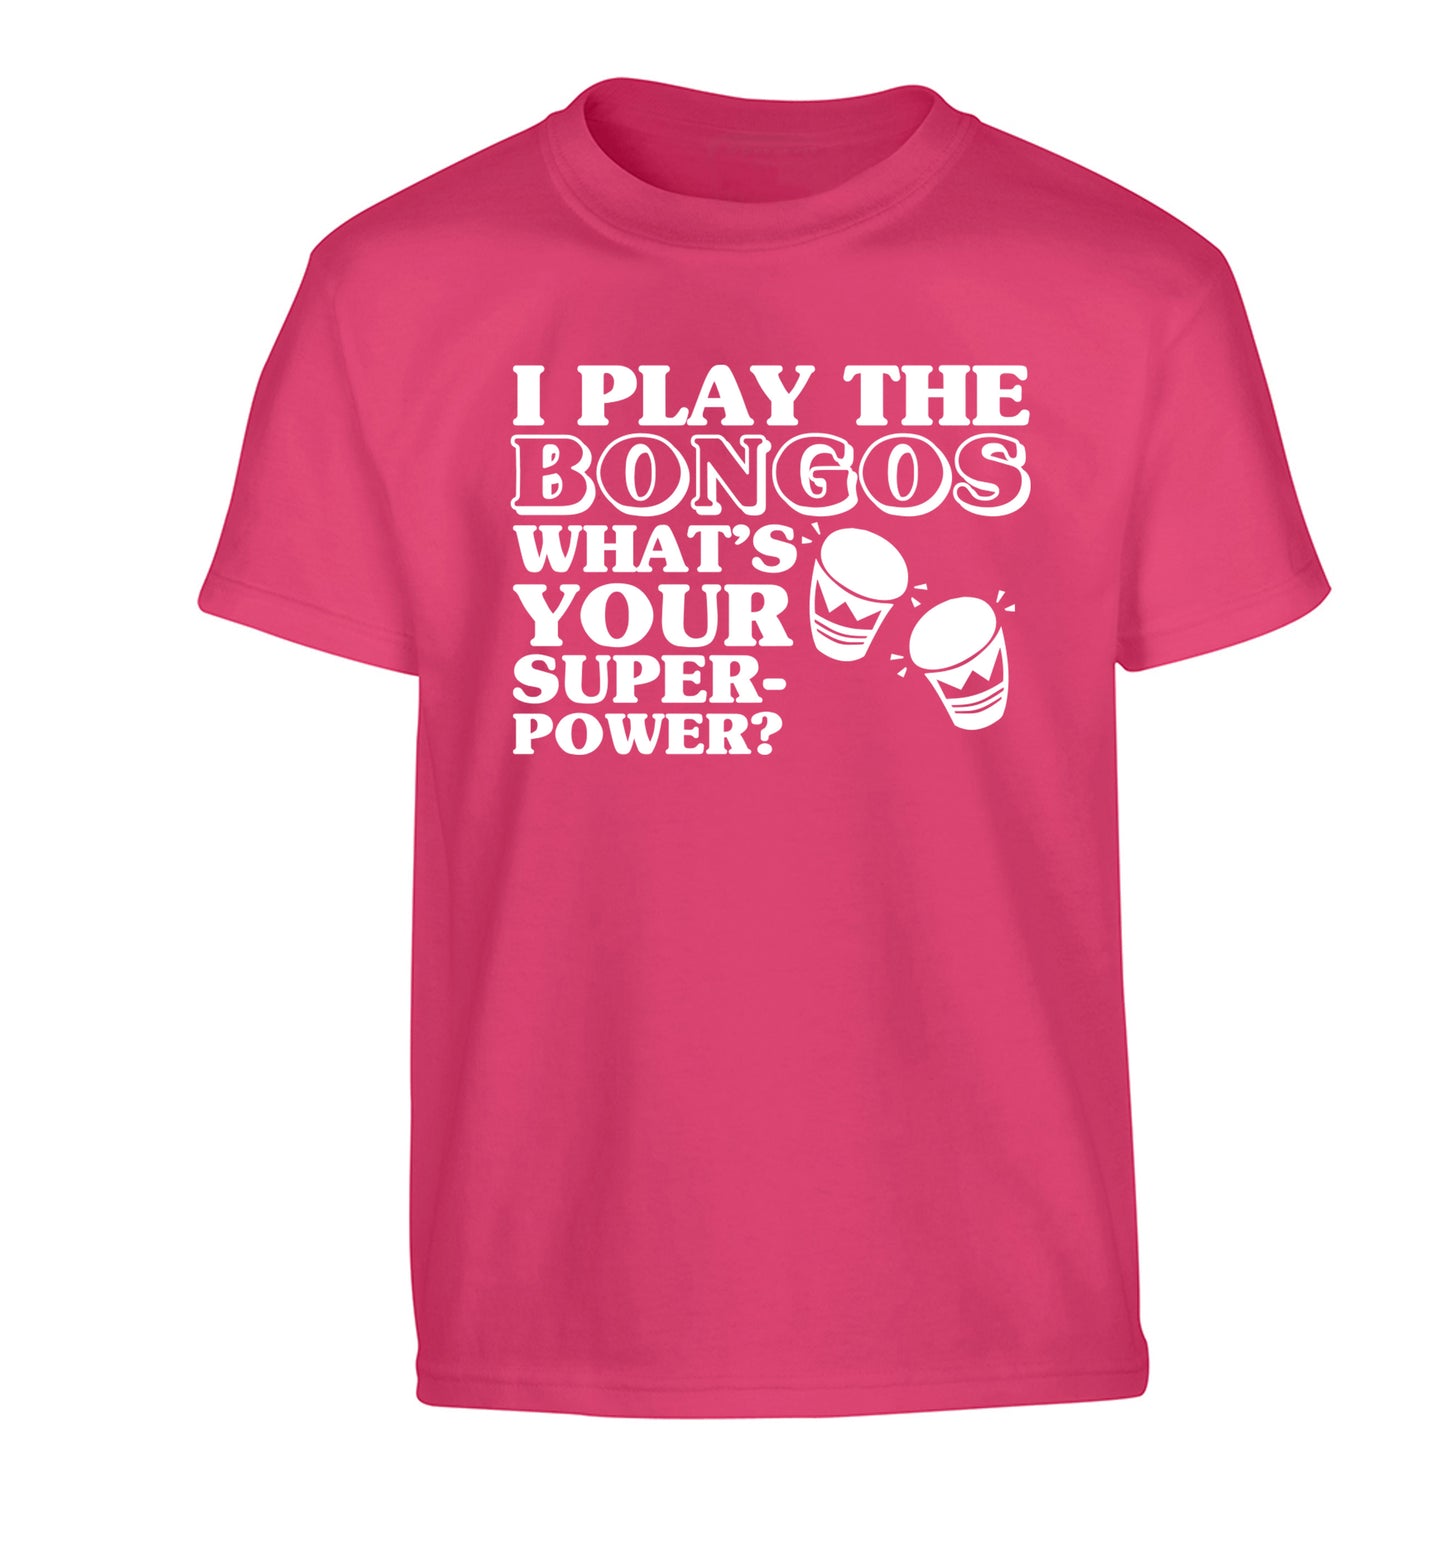 I play the bongos what's your superpower? Children's pink Tshirt 12-14 Years